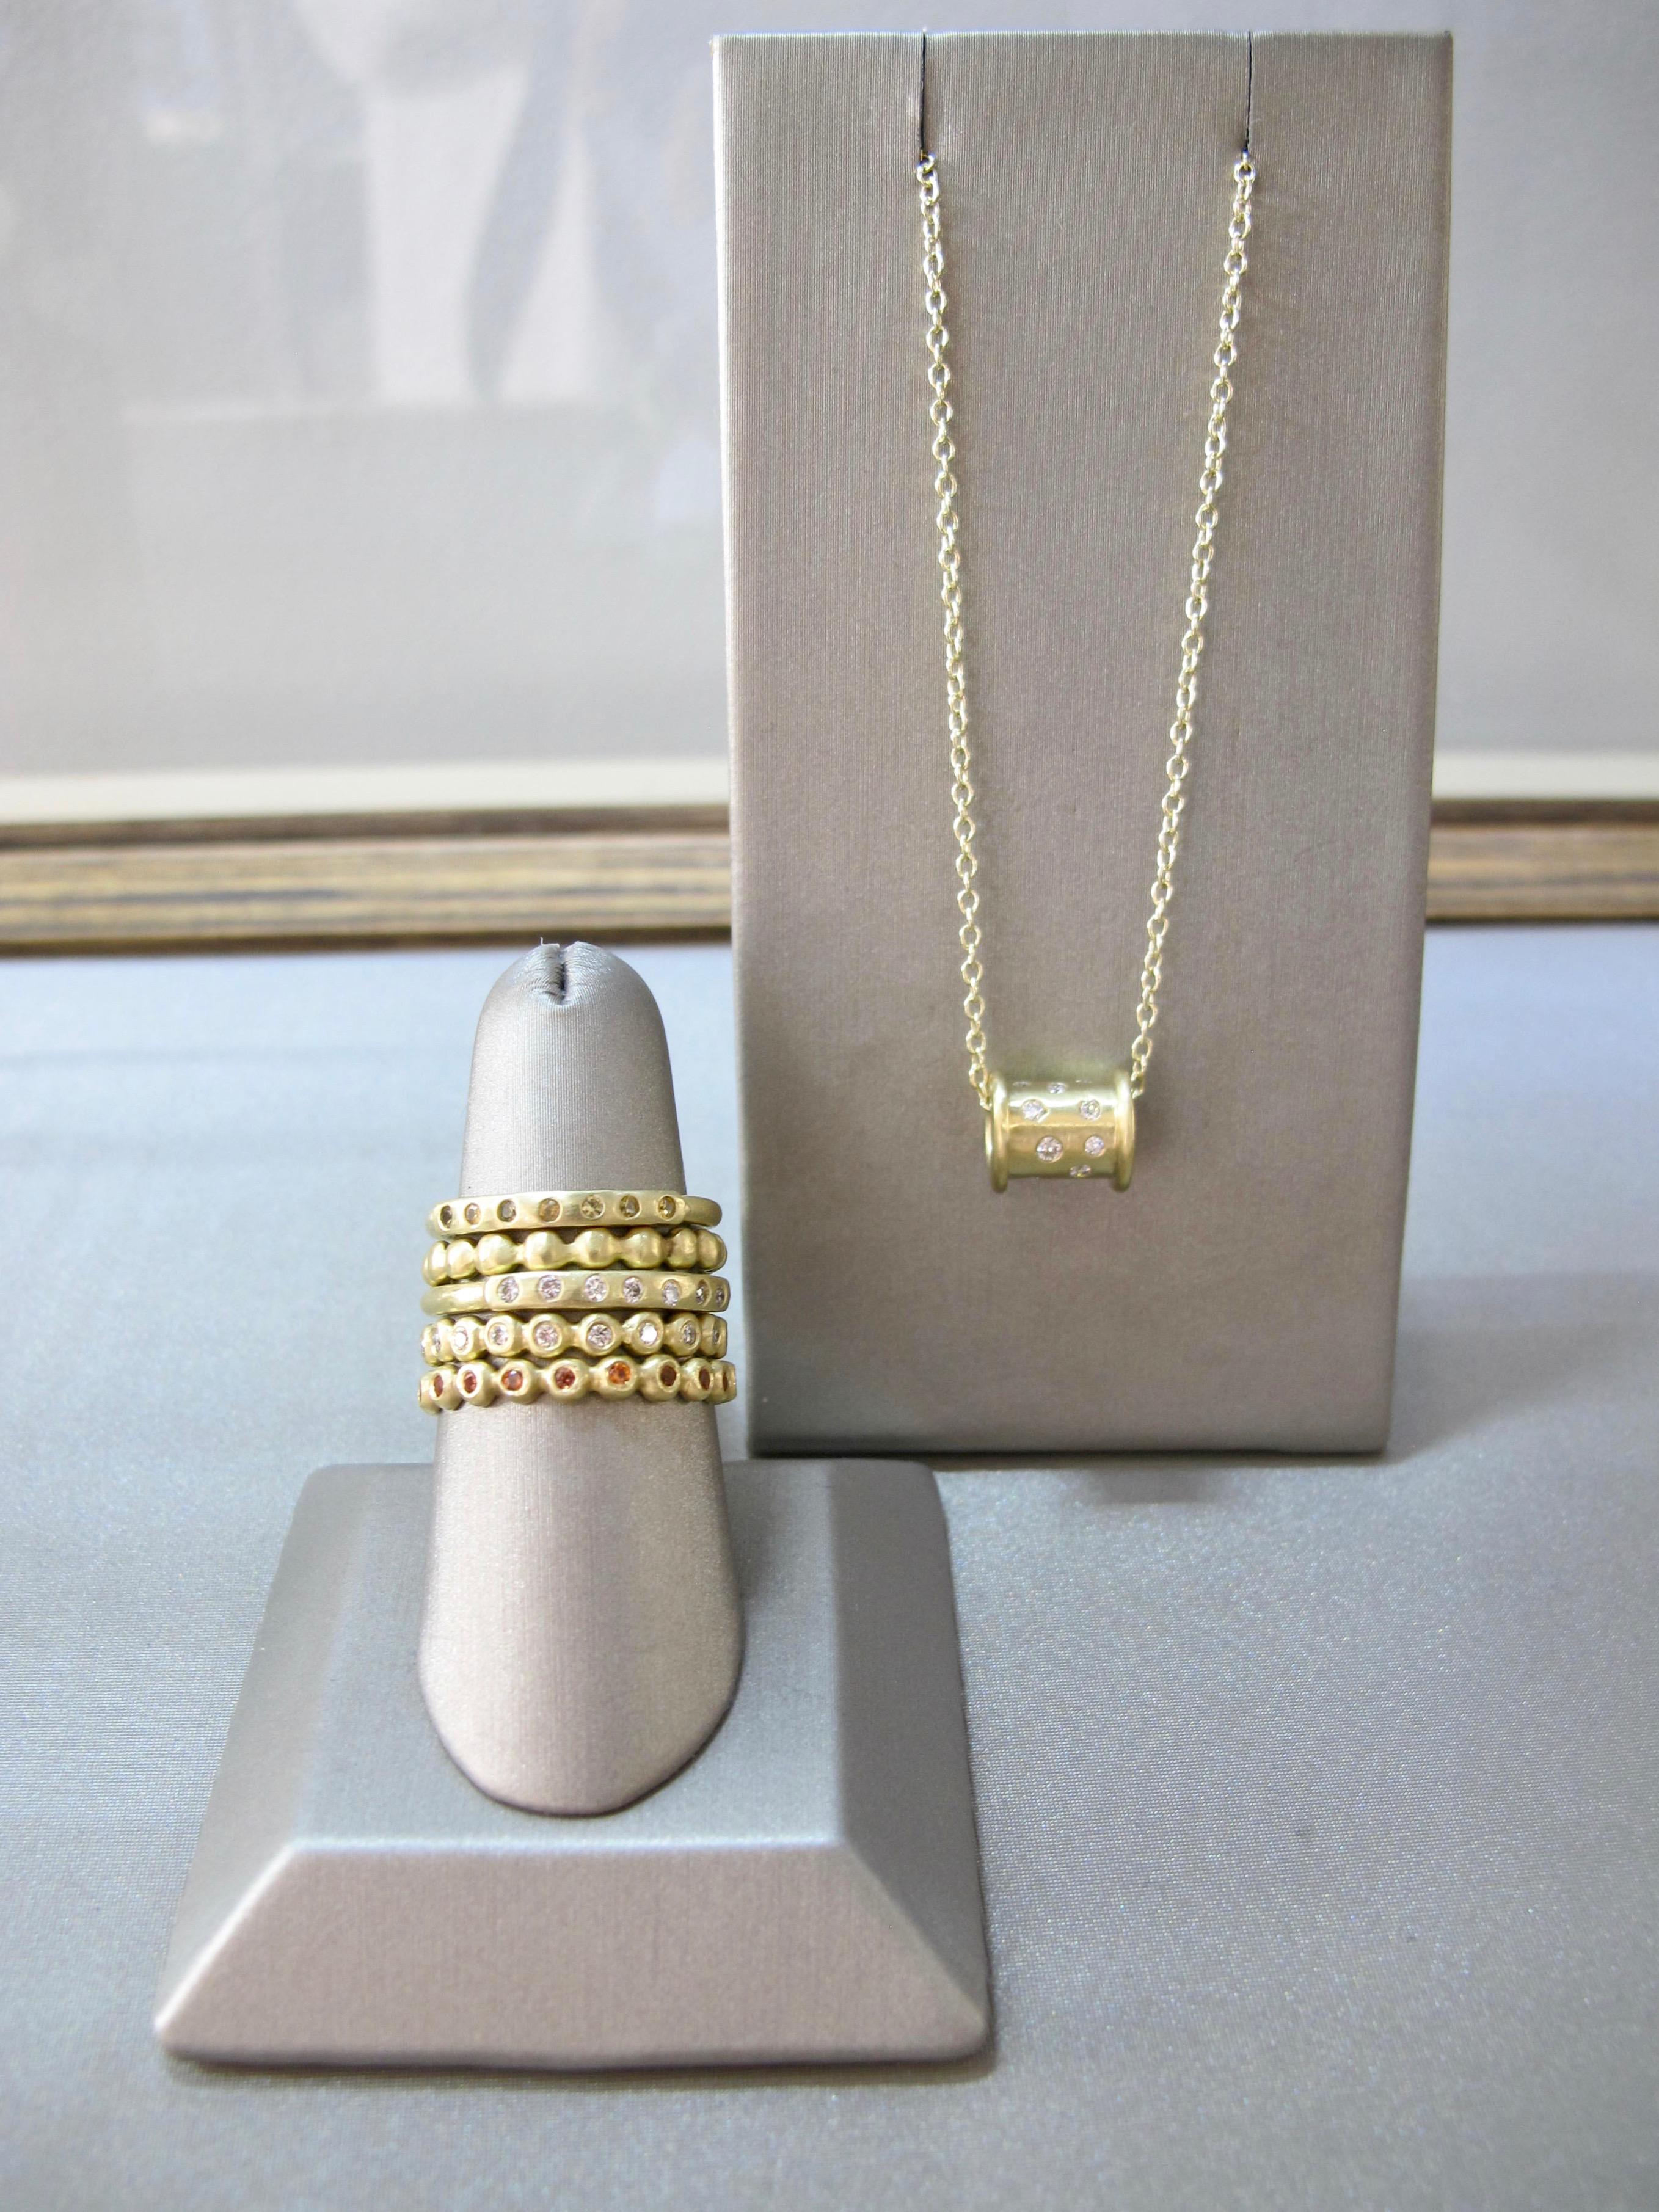 Handmade in 18k Green Gold and studded with white diamonds Faye Kim's modern spool necklace design is a great addition to any jewelry box. Wear alone or layered, the look is timeless and fit for every day.

Cable chain is 16-18